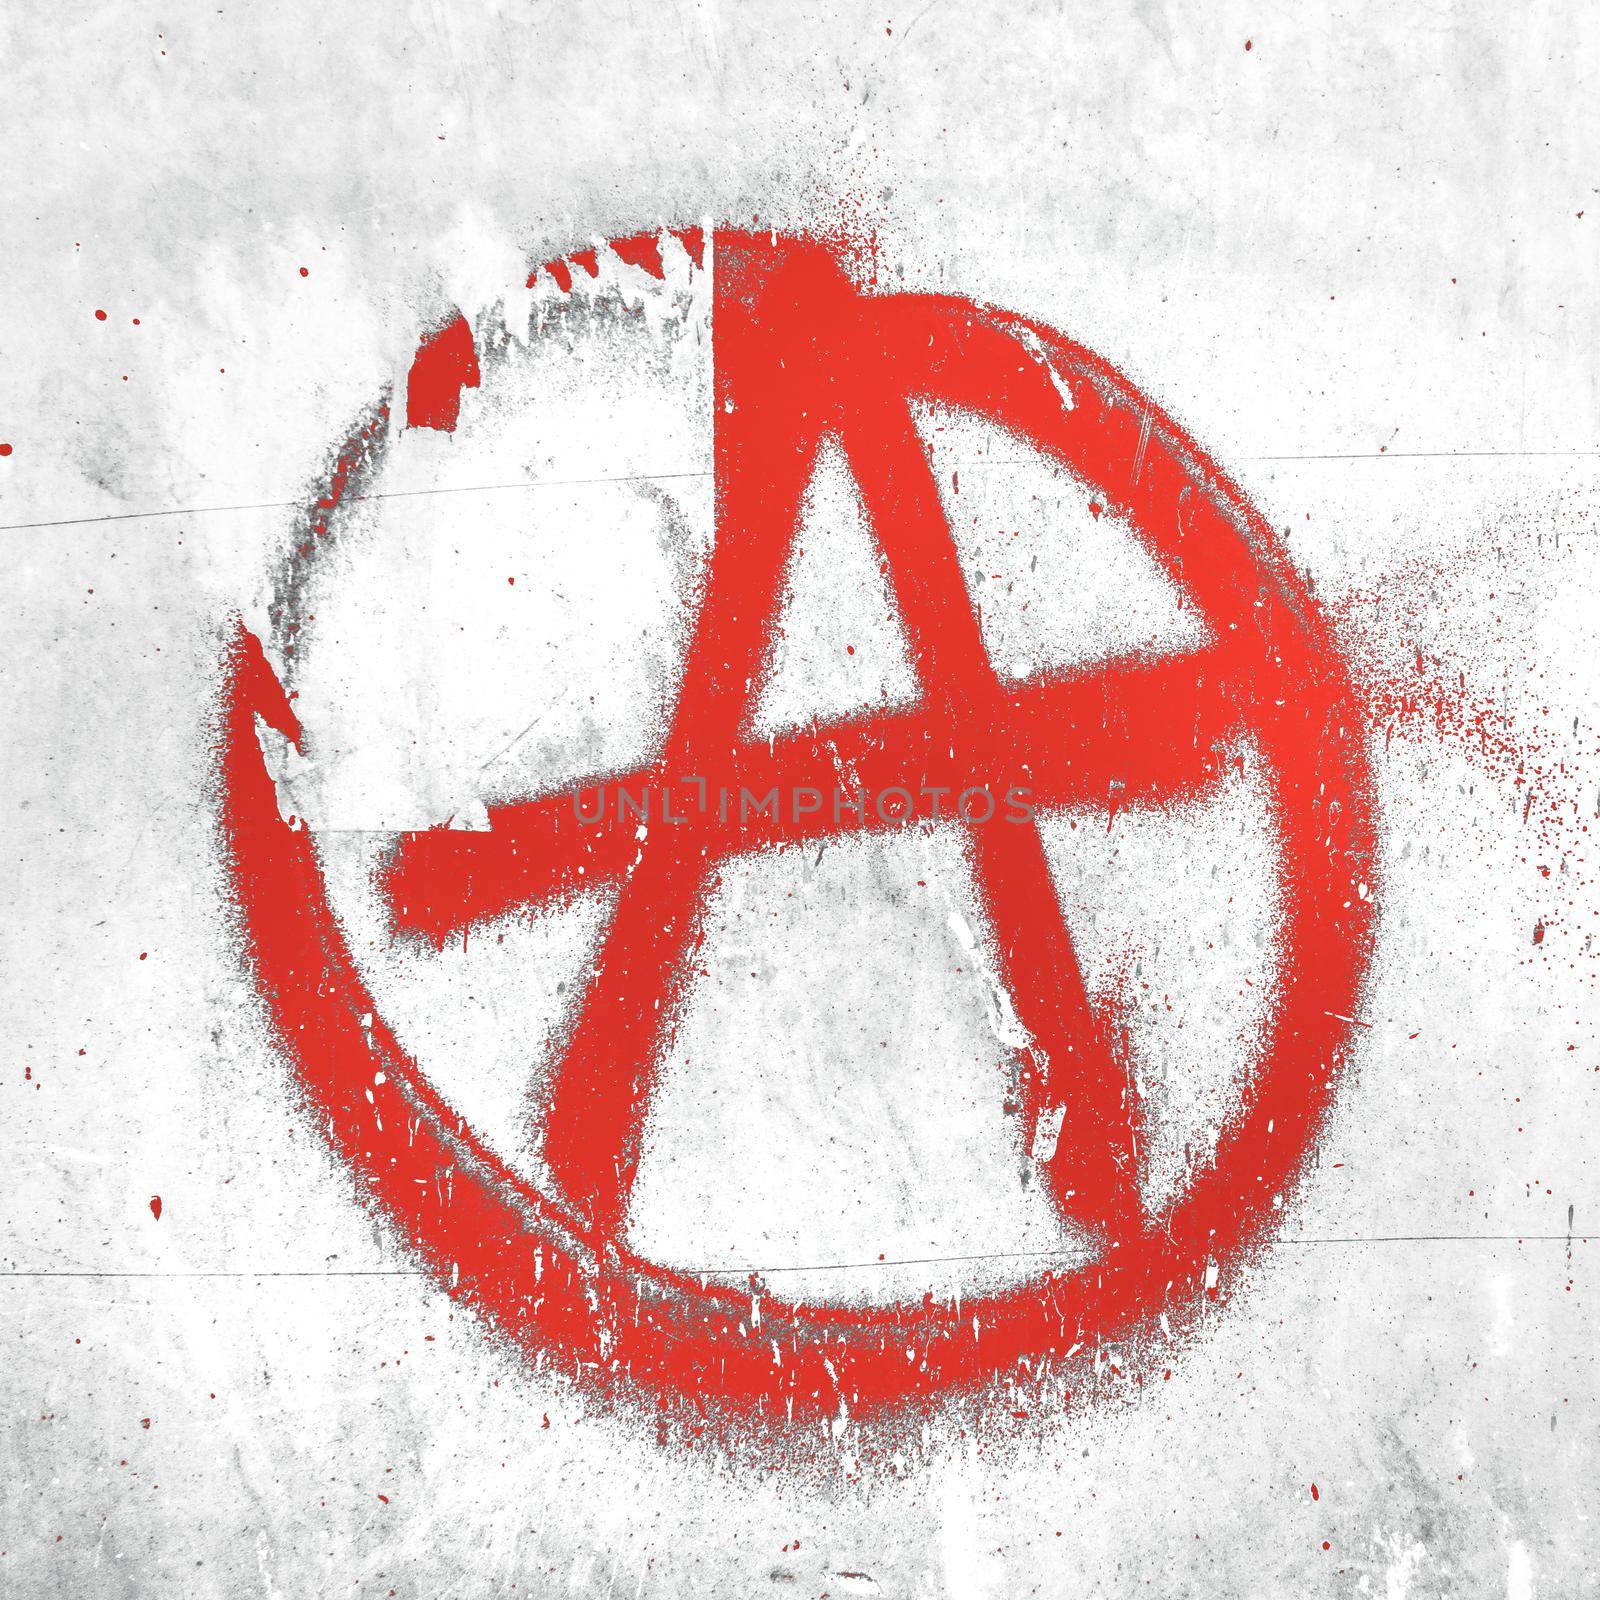 Red anarchy symbol on wall. Ideal for textures, backgrounds and concepts.